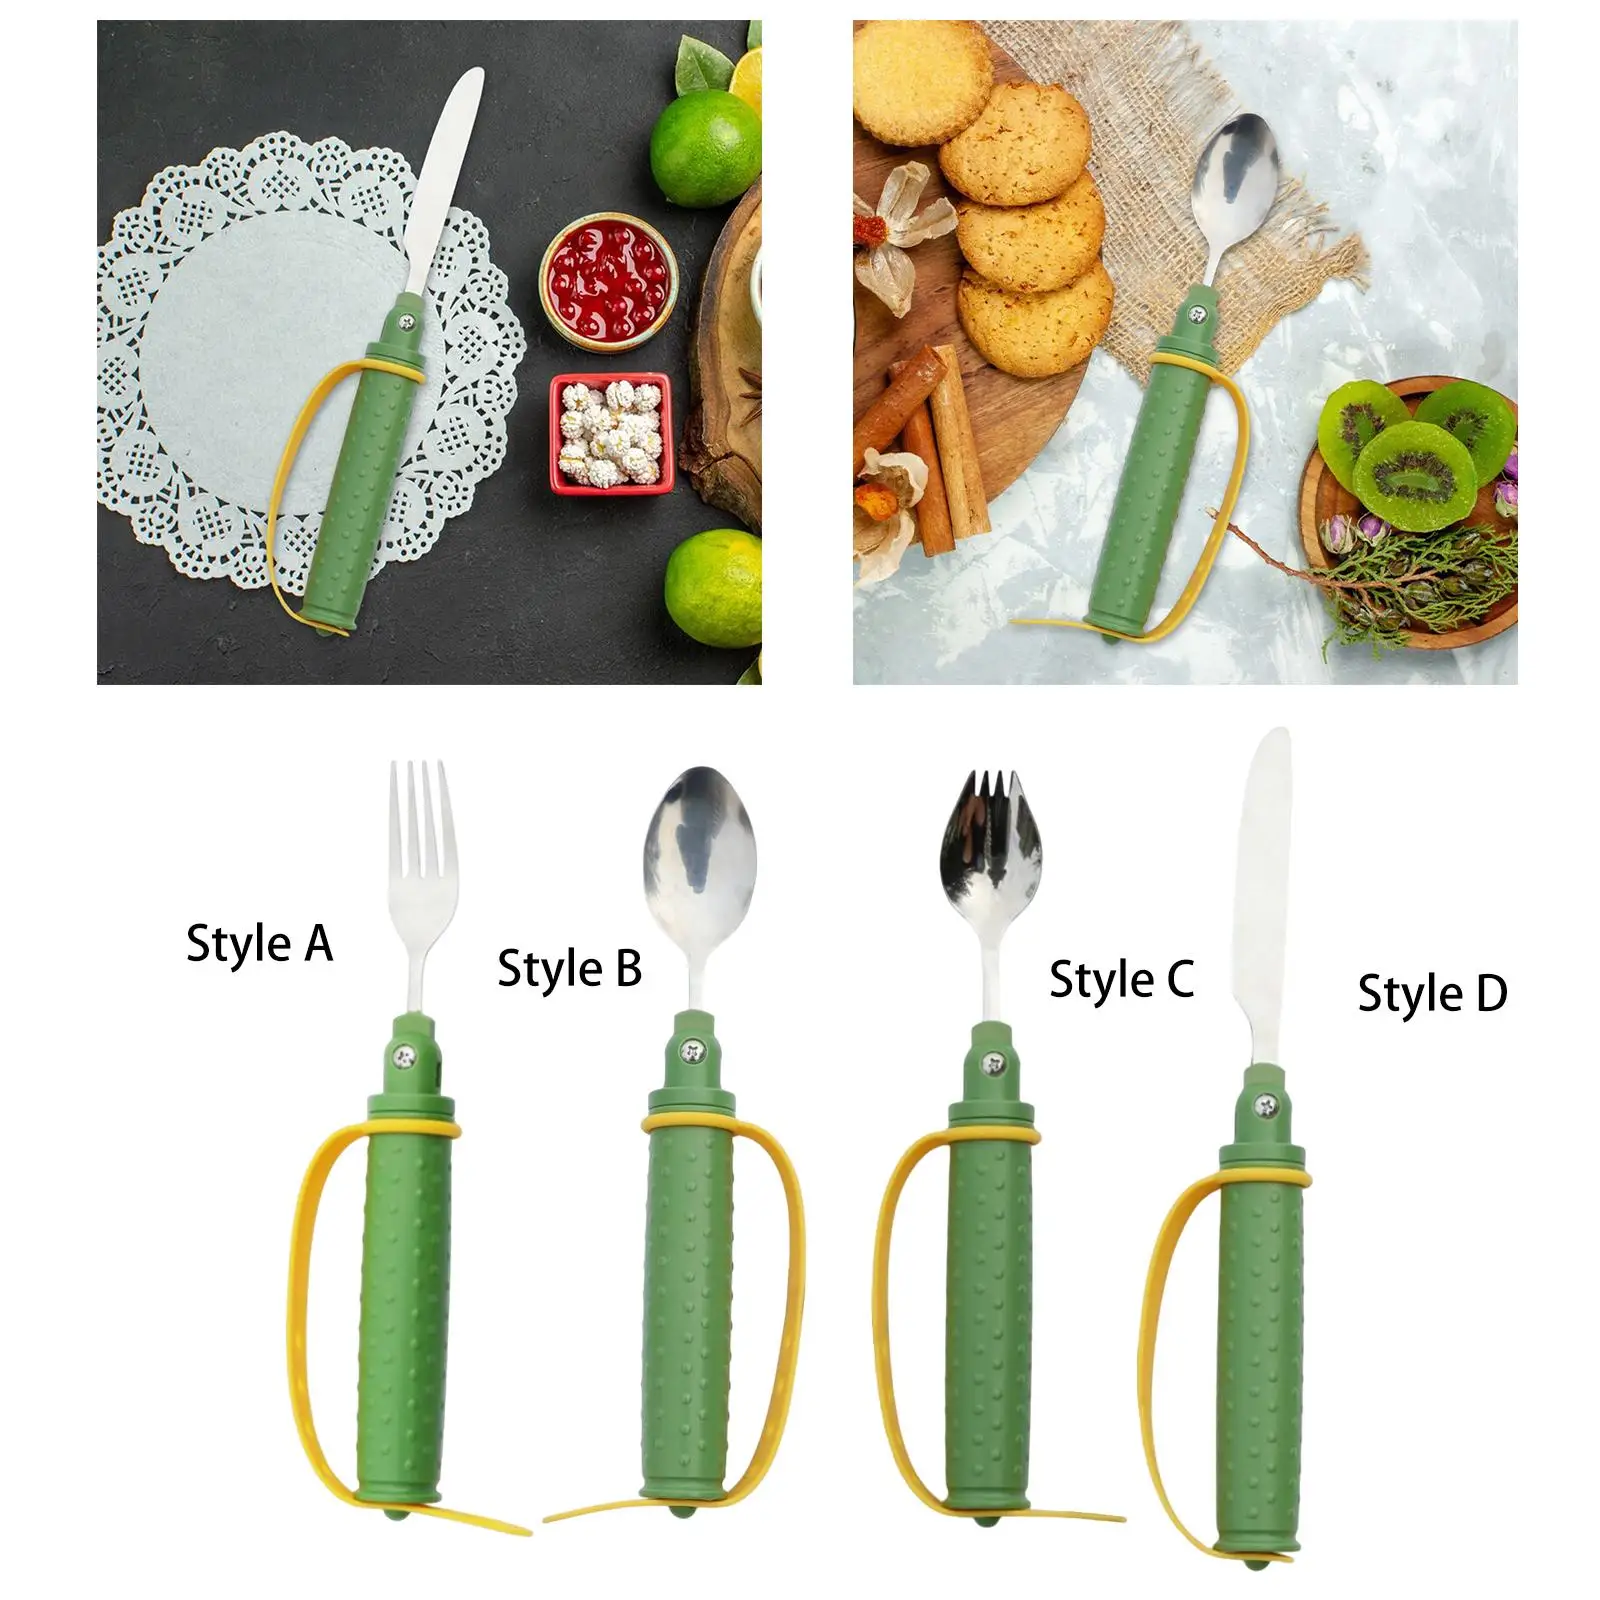 Easy Grip Spoon Fork with Silicone Holder Universal Anti Slip Anti shaking Stainless Steel Caring Utensils for Eating Elderly